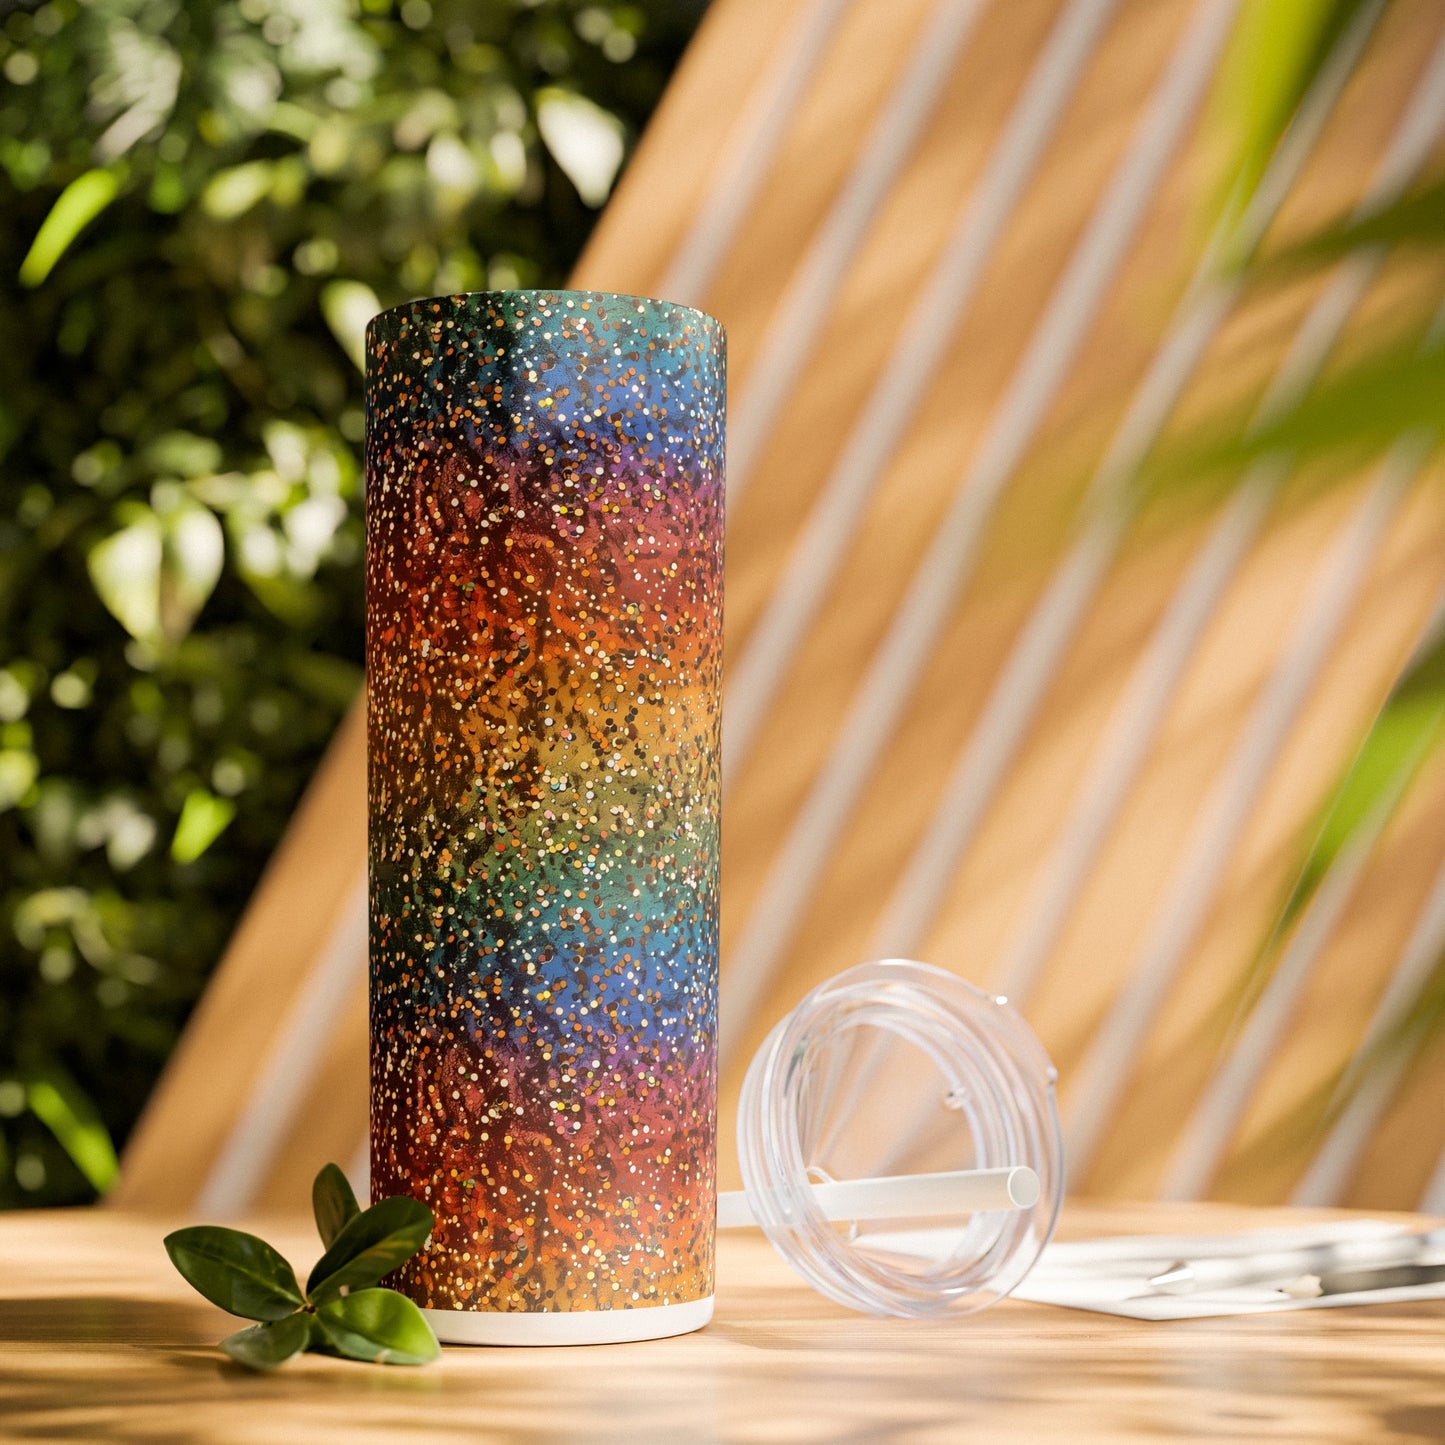 Stainless Steel Tumbler with Lid & Straw, 20 oz, Light Rainbow Glitter  - Double-walled, Keeps Drinks Hot or Cold